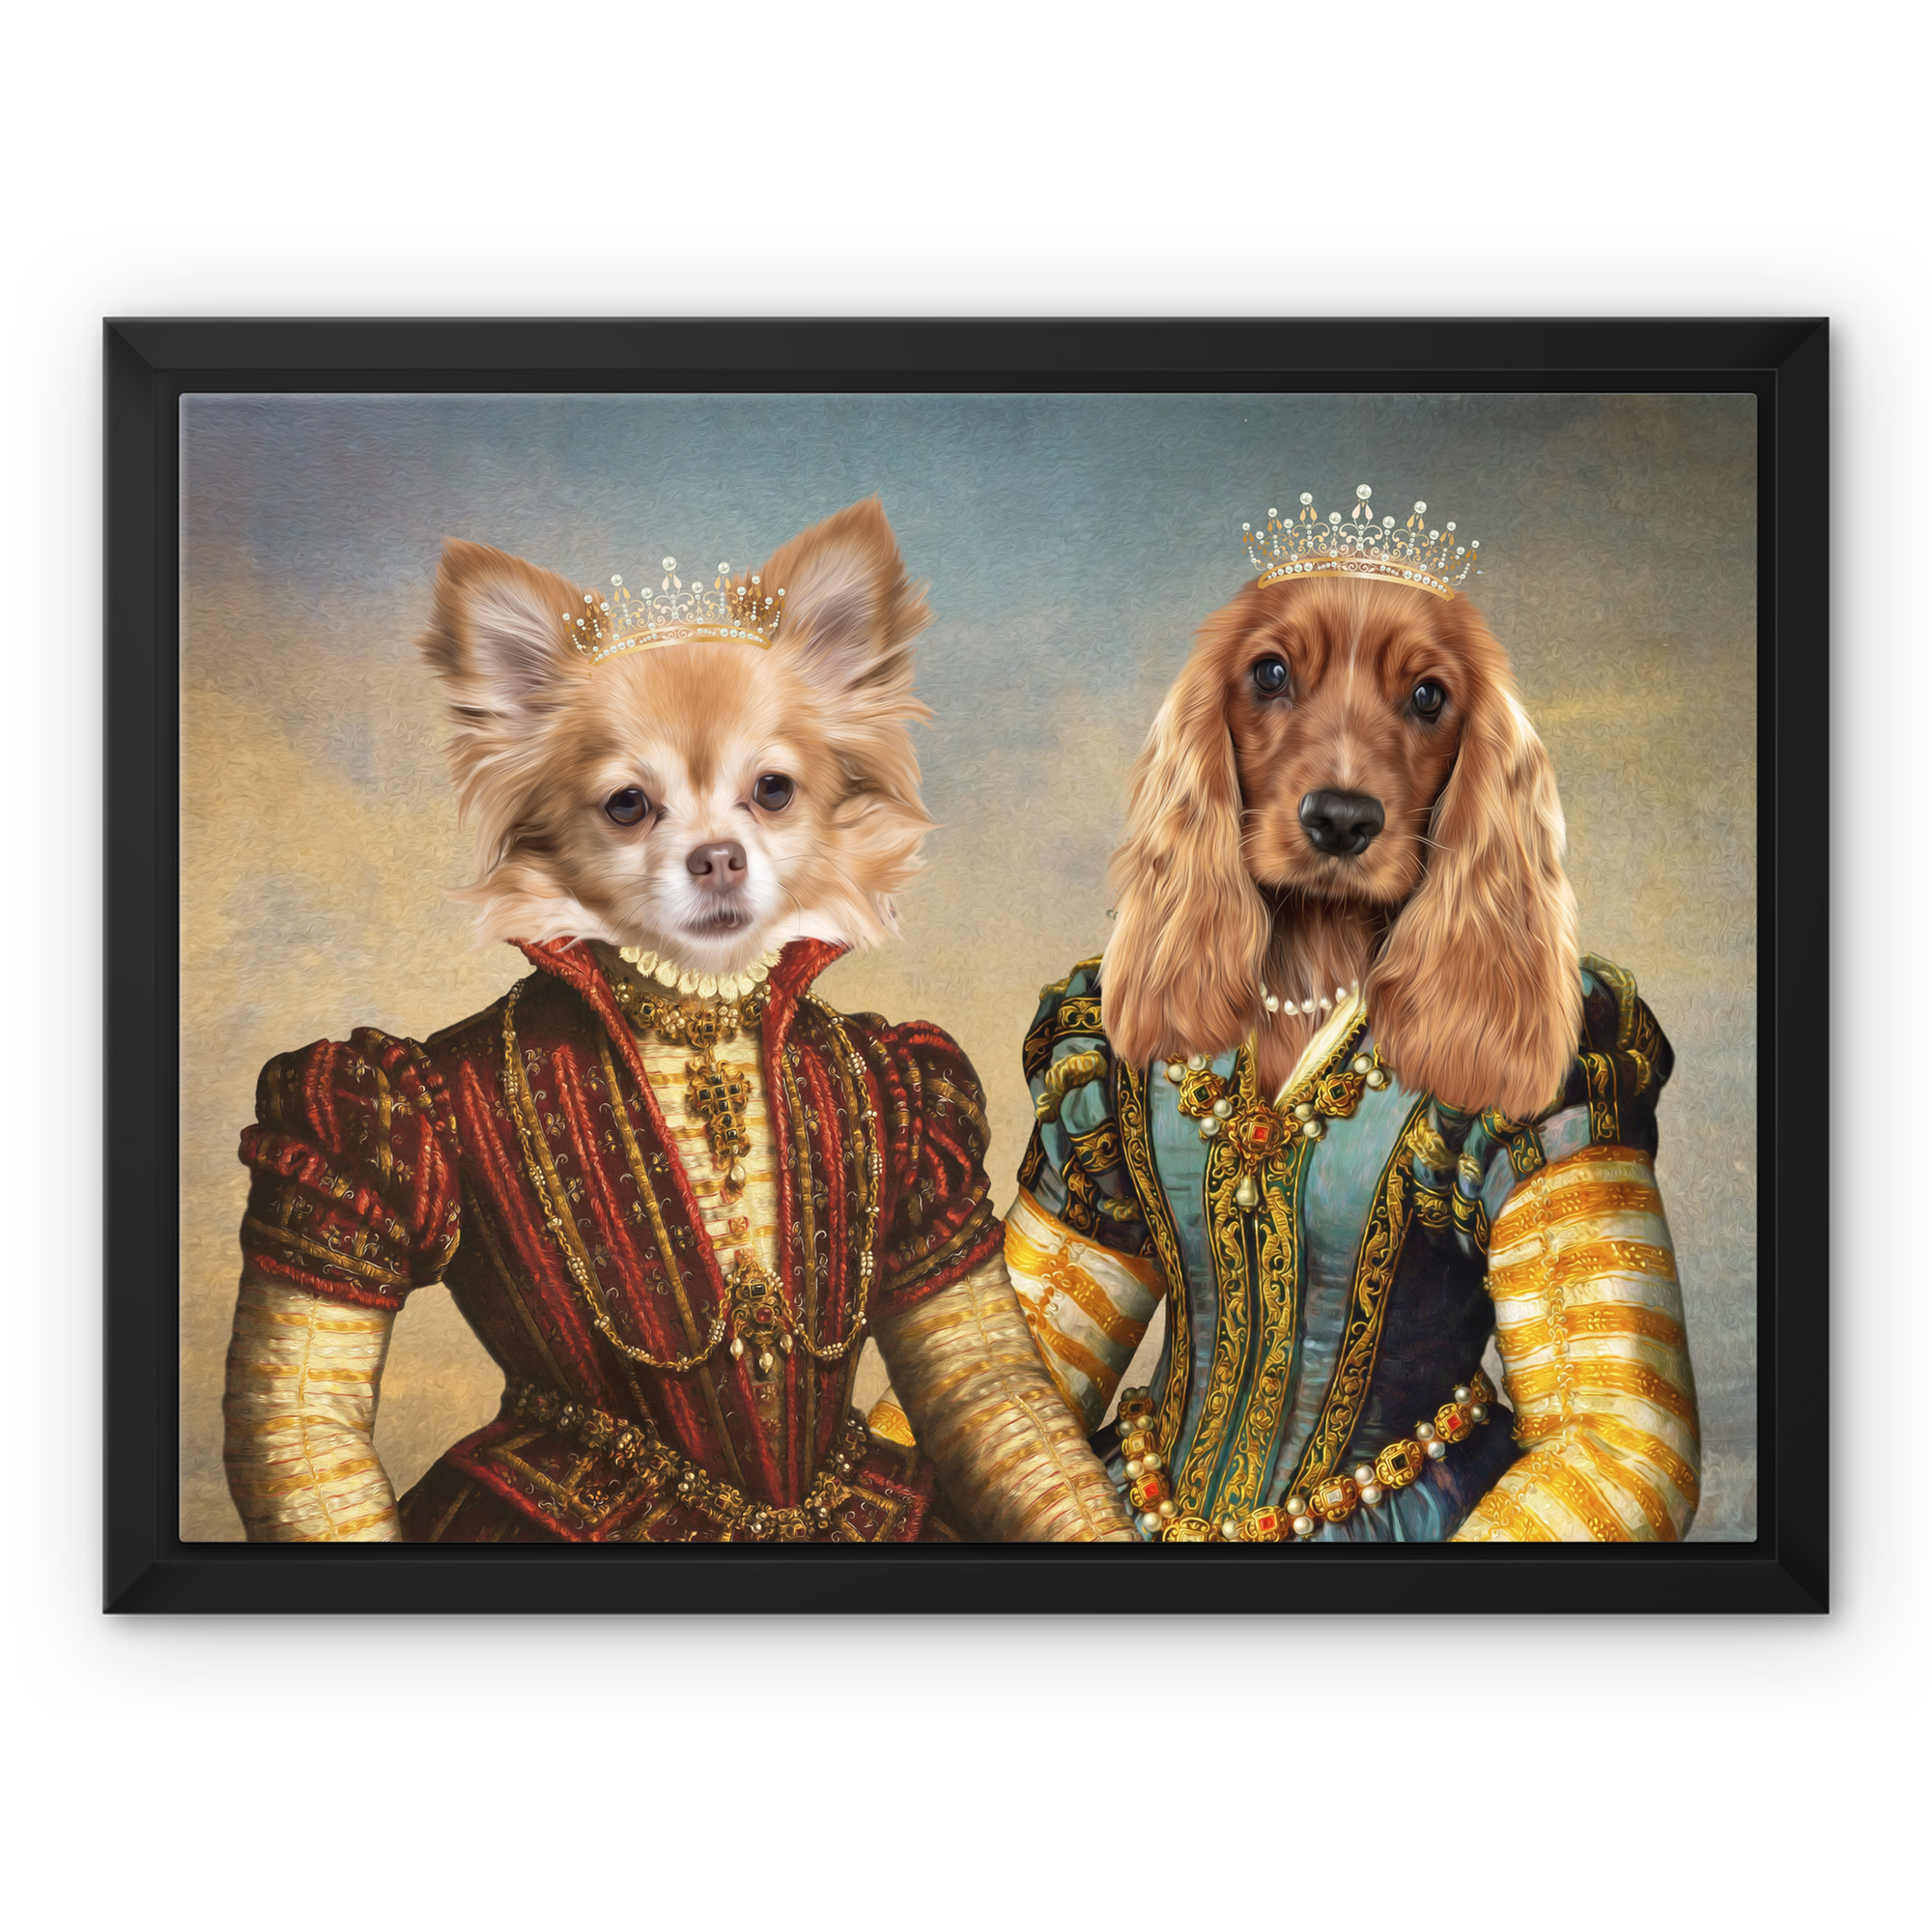 The Princesses: Custom Pet Canvas - Paw & Glory - #pet portraits# - #dog portraits# - #pet portraits uk#paw & glory, pet portraits canvas,dog pictures on canvas, dog wall art canvas, pet photo canvas, personalized dog and owner canvas uk, the pet canvas